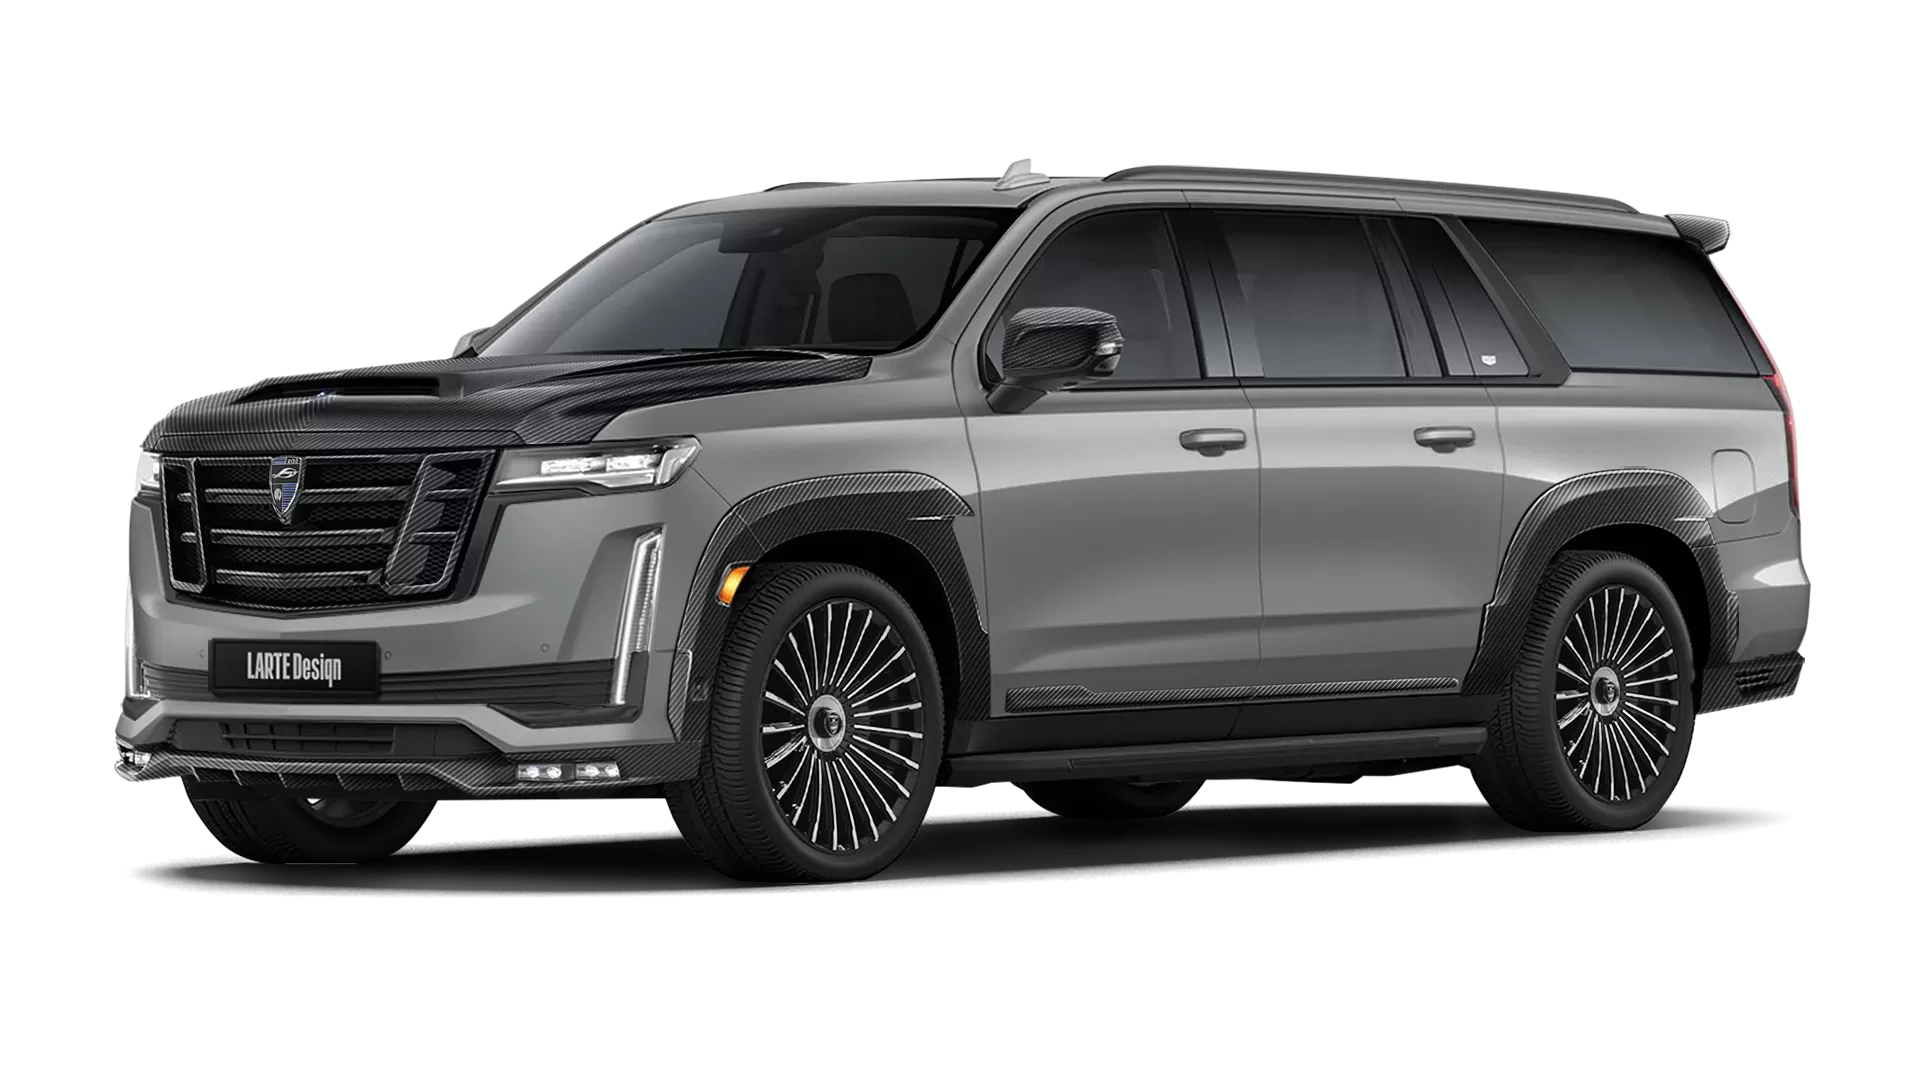 Cadillac Escalade ESV GMT 1XX with carbon body kit: front view shown in Satin Steel Metallic